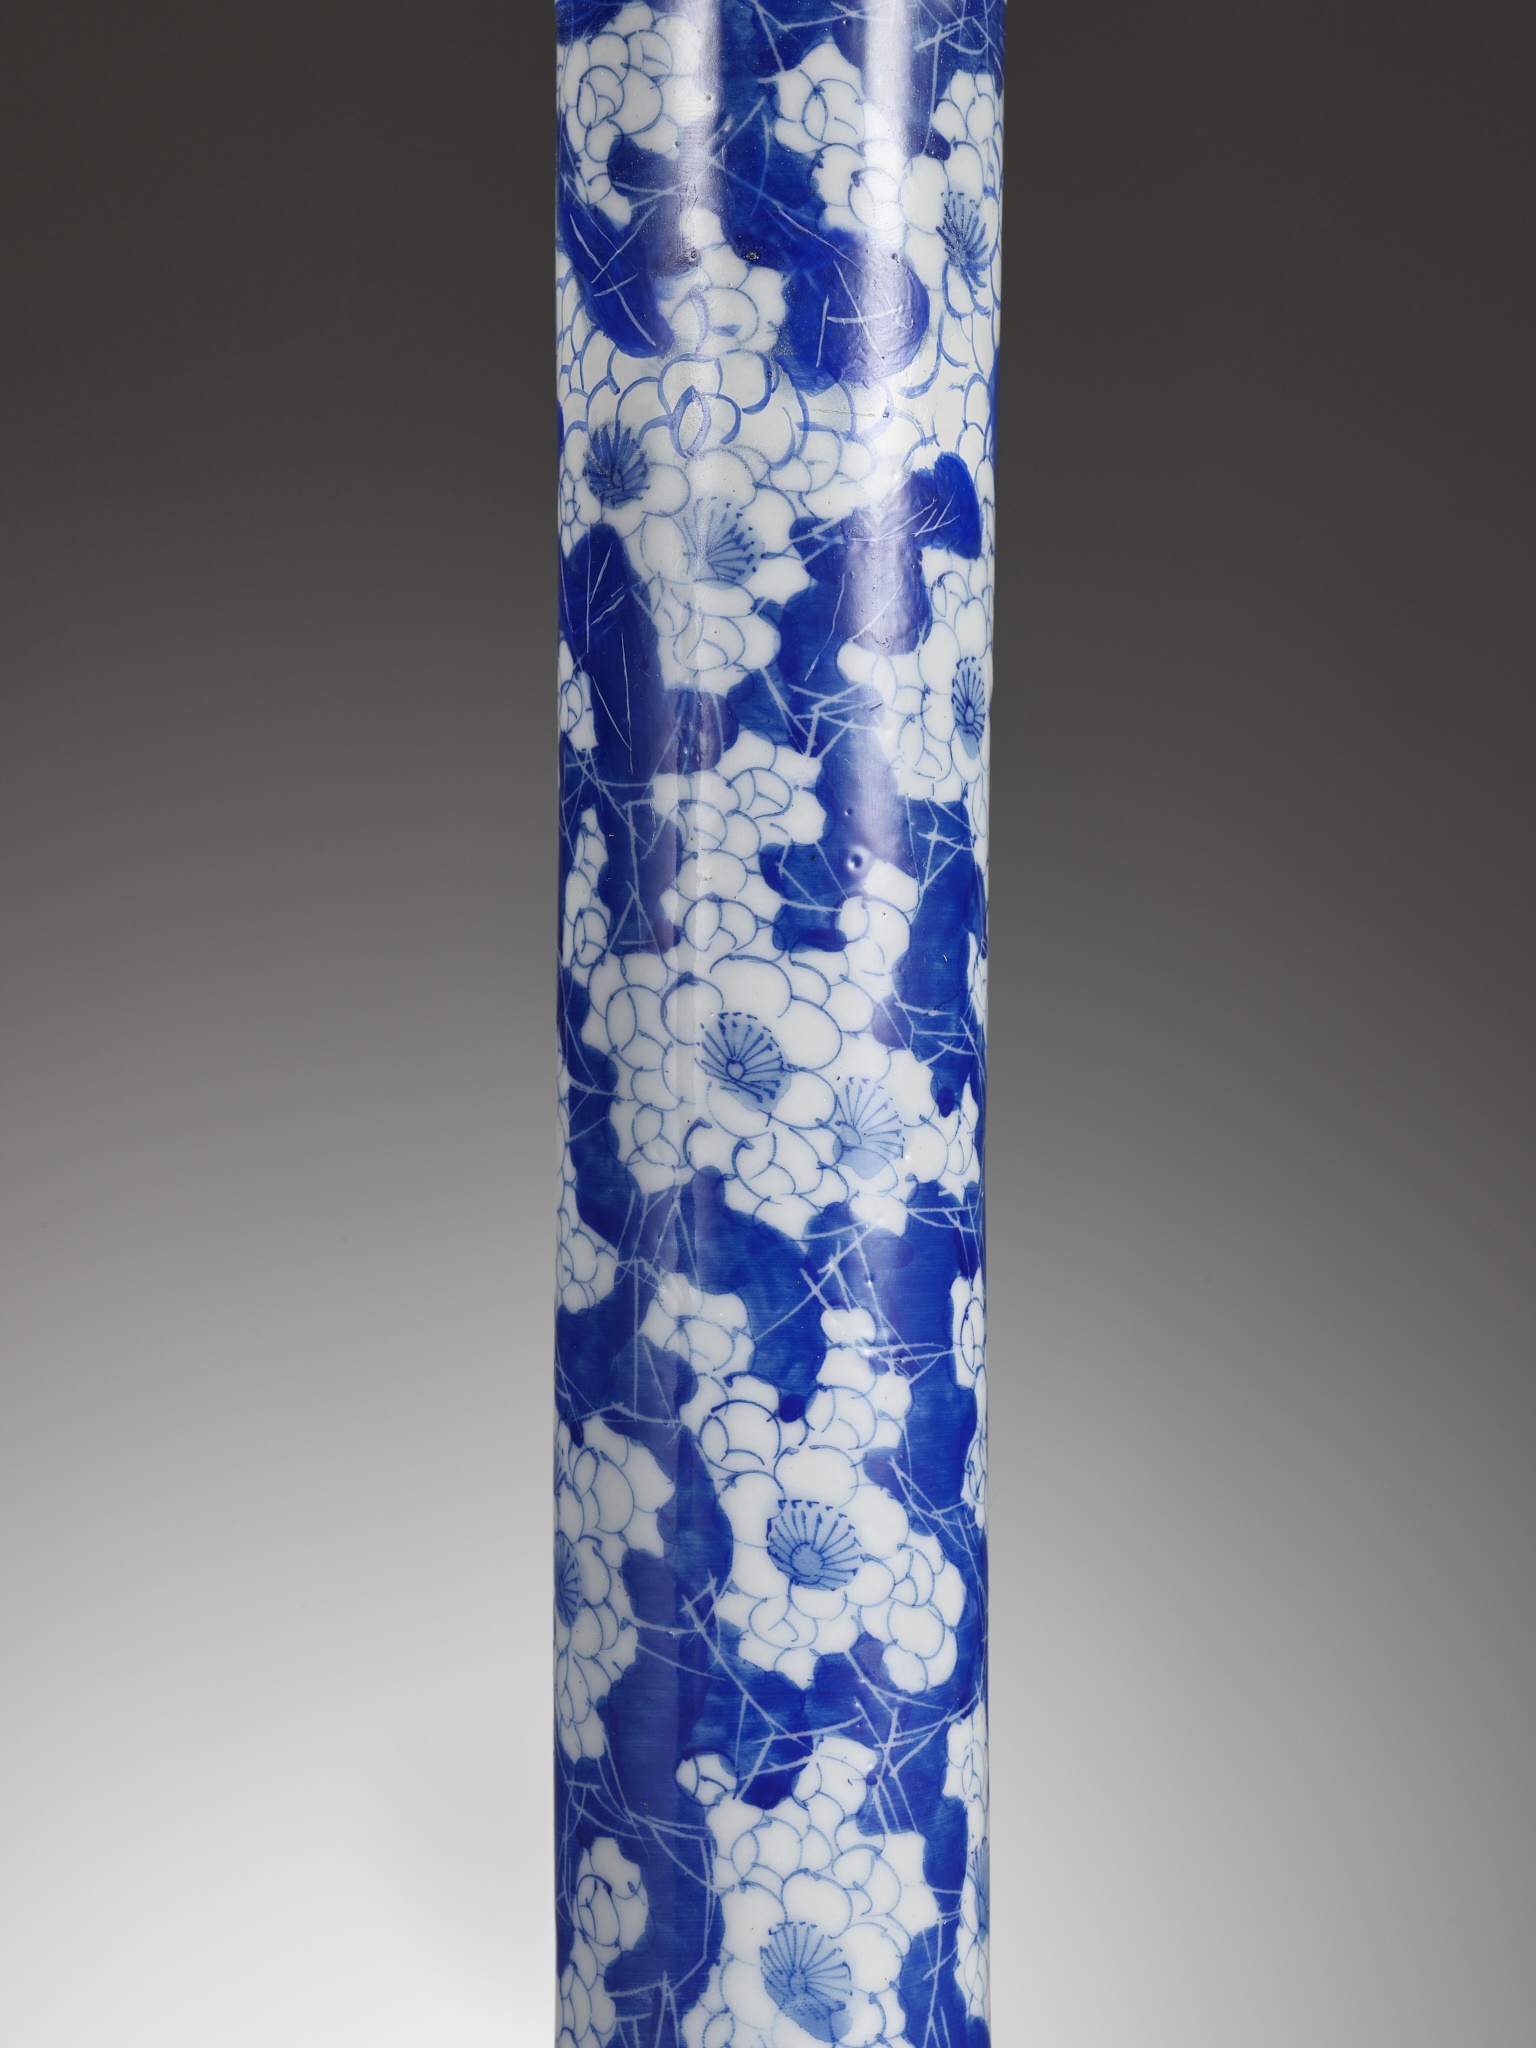 A PAIR OF BLUE AND WHITE 'ICE CRACK AND PRUNUS' BOTTLE VASES, 19TH CENTURY - Image 6 of 14